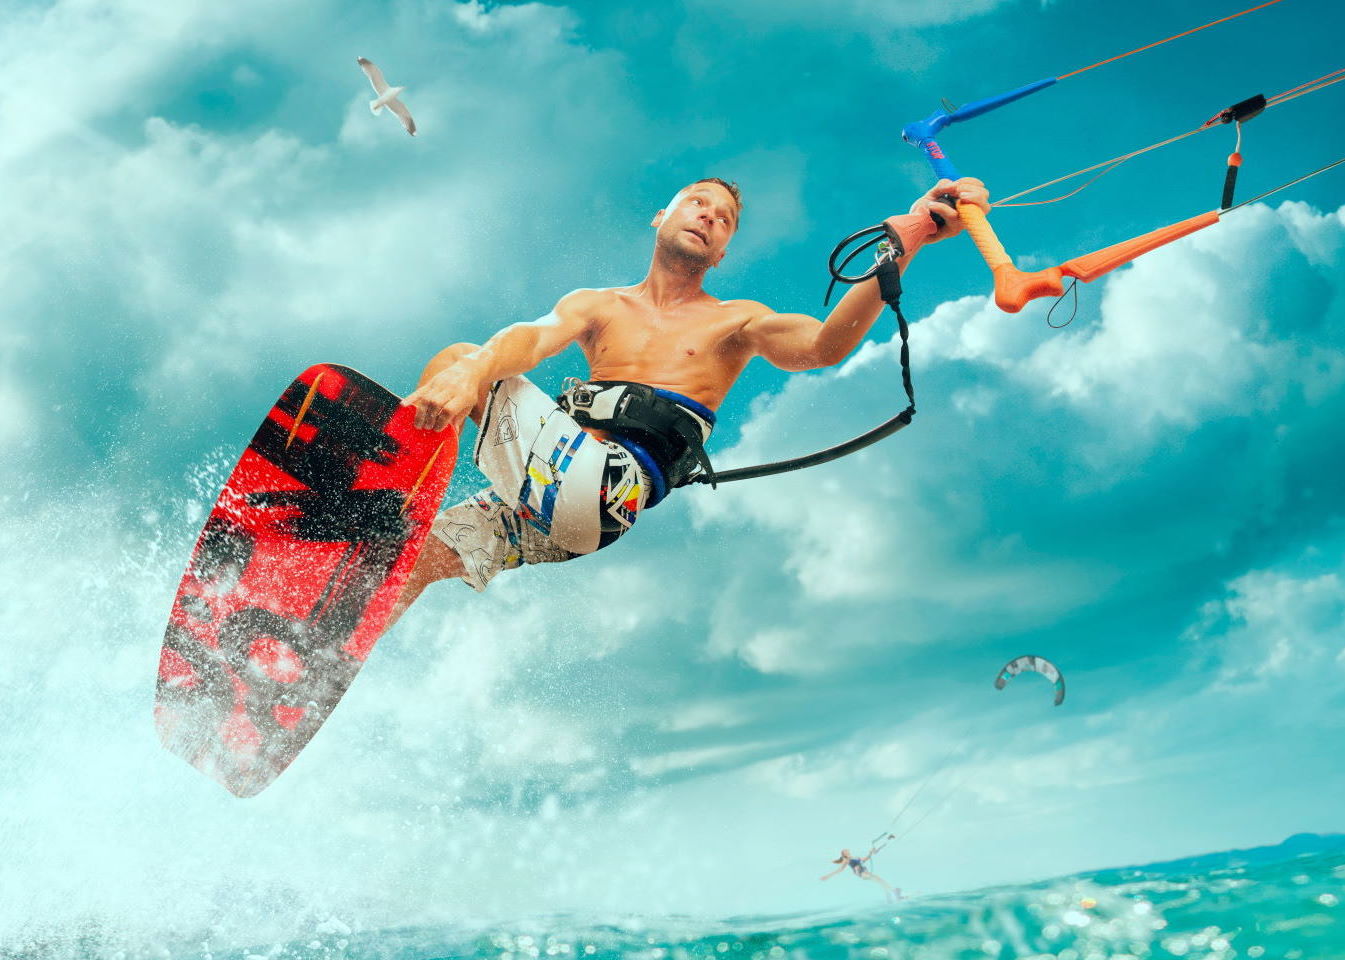 A well-toned athletic man is kitesurfing on a high wave and holding on to the rope